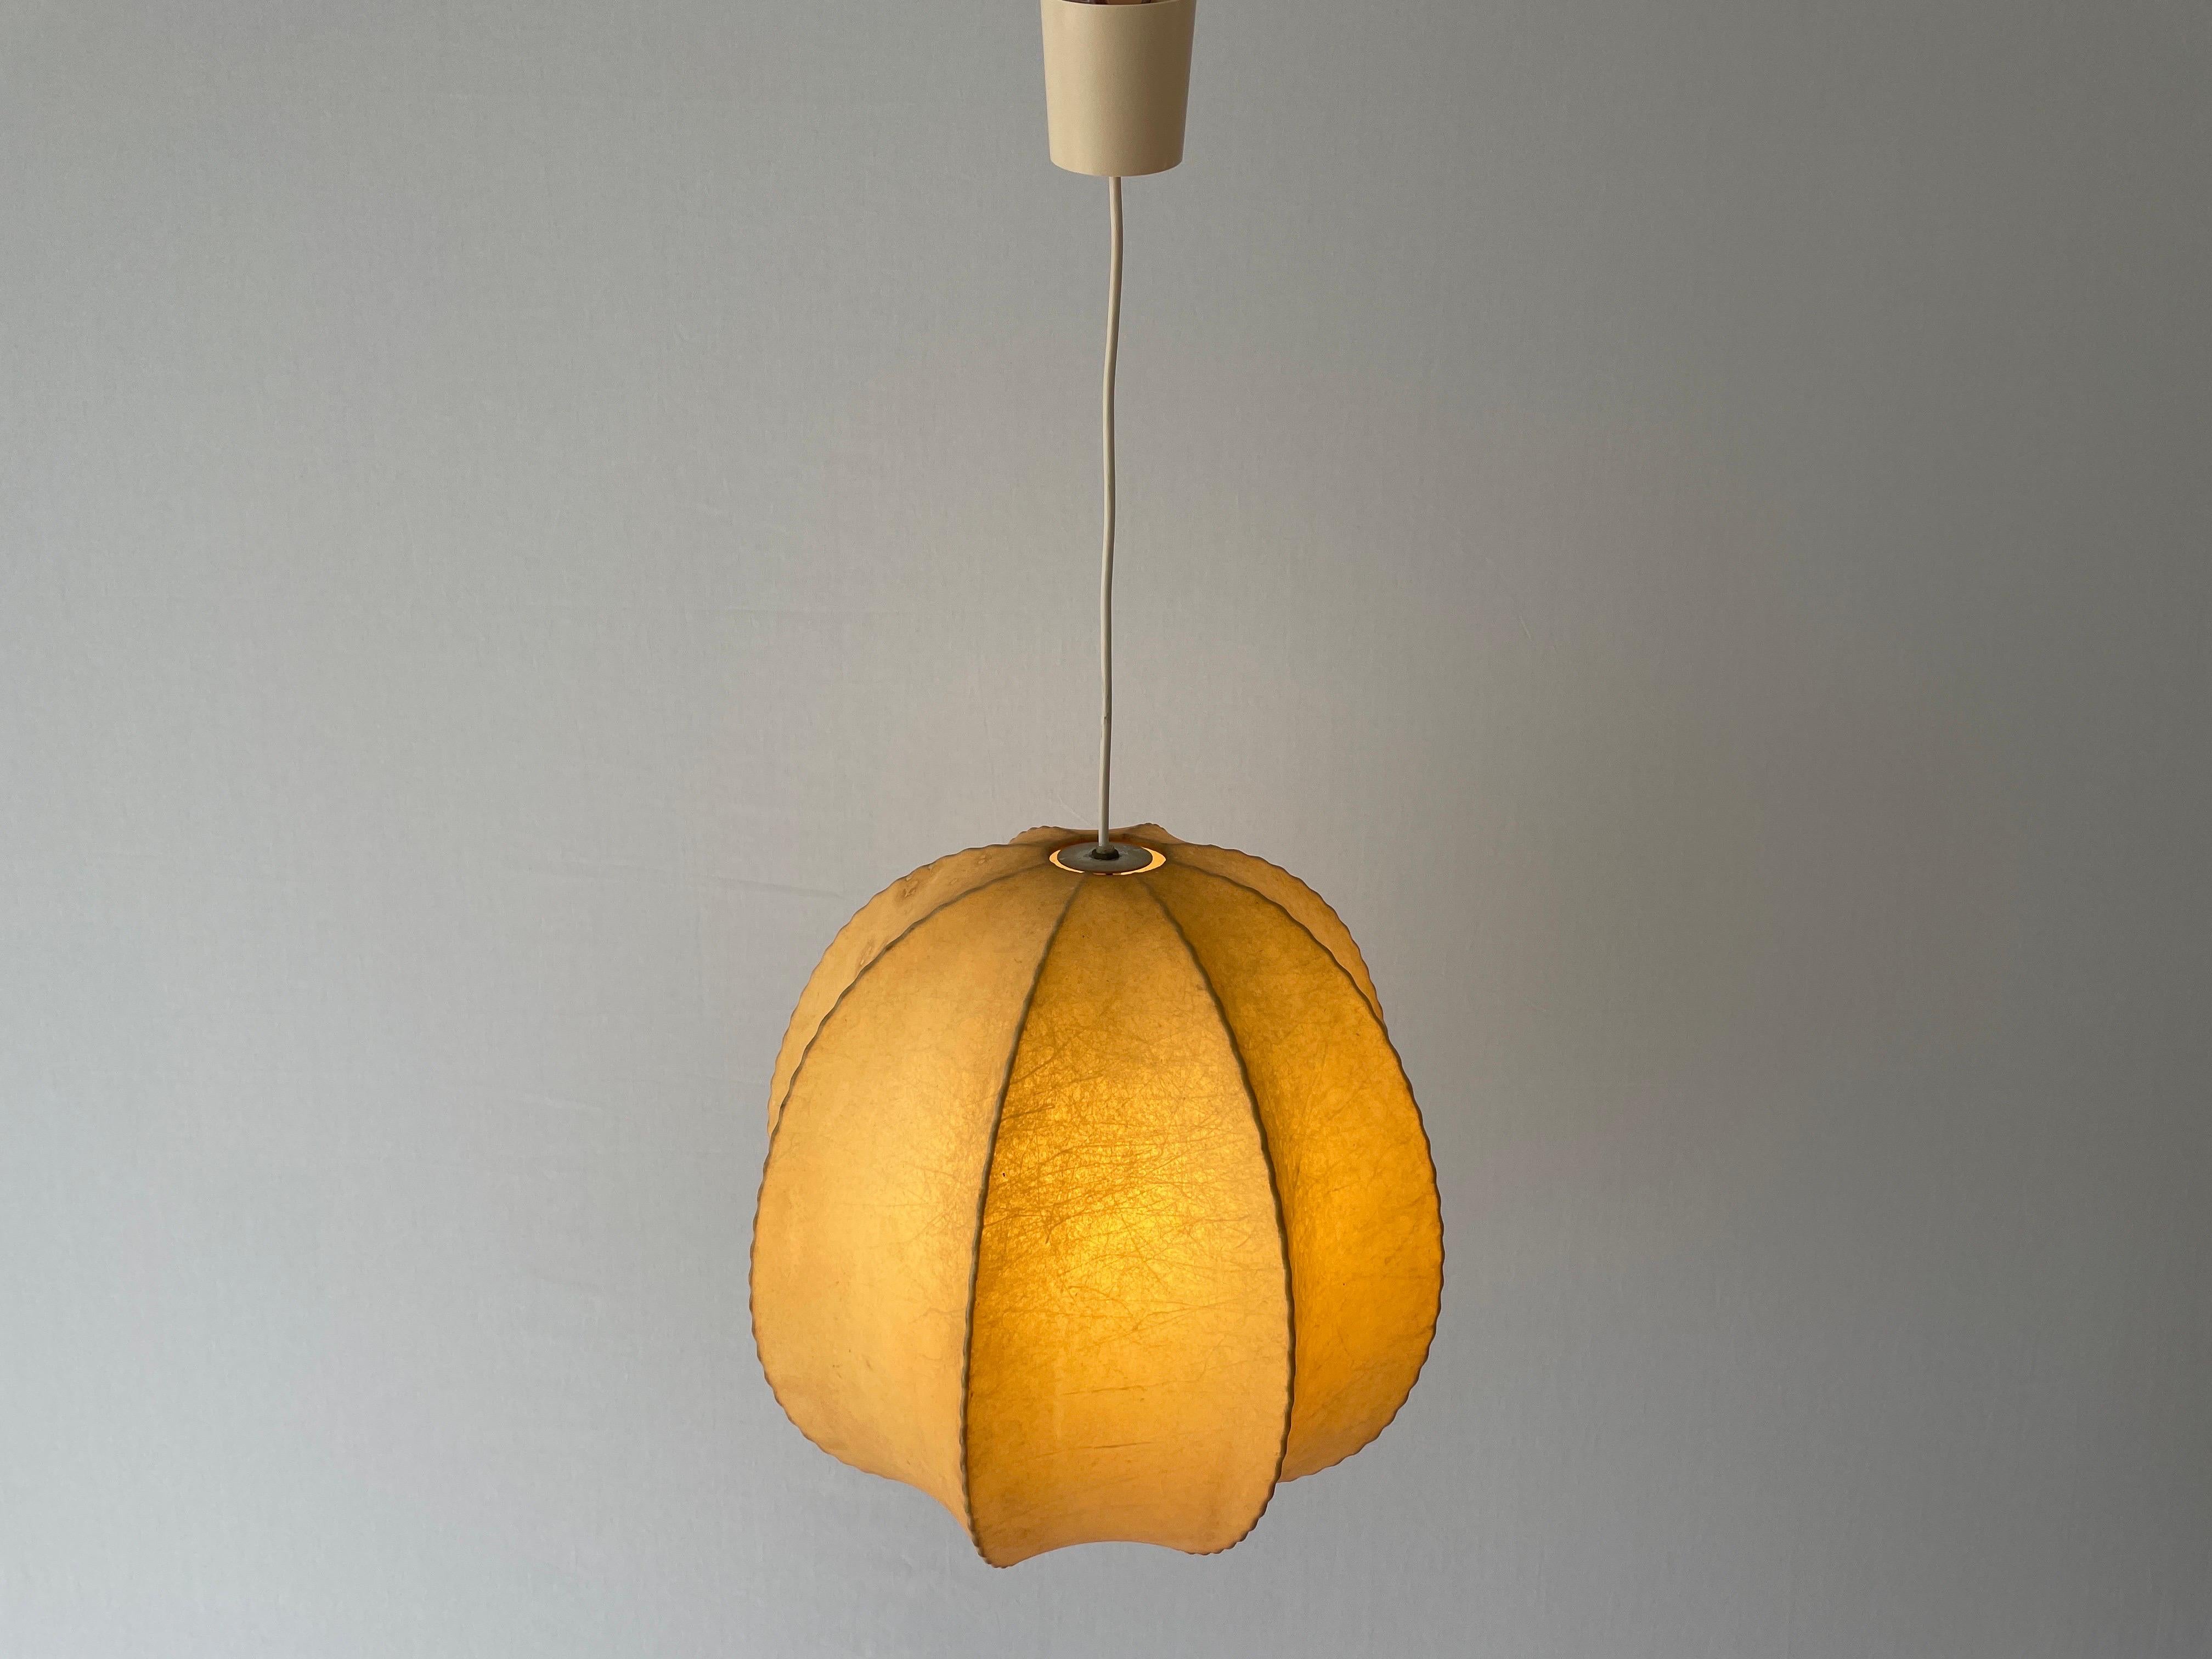 Cocoon Ball Design Pendant Lamp, 1960s, Italy For Sale 11